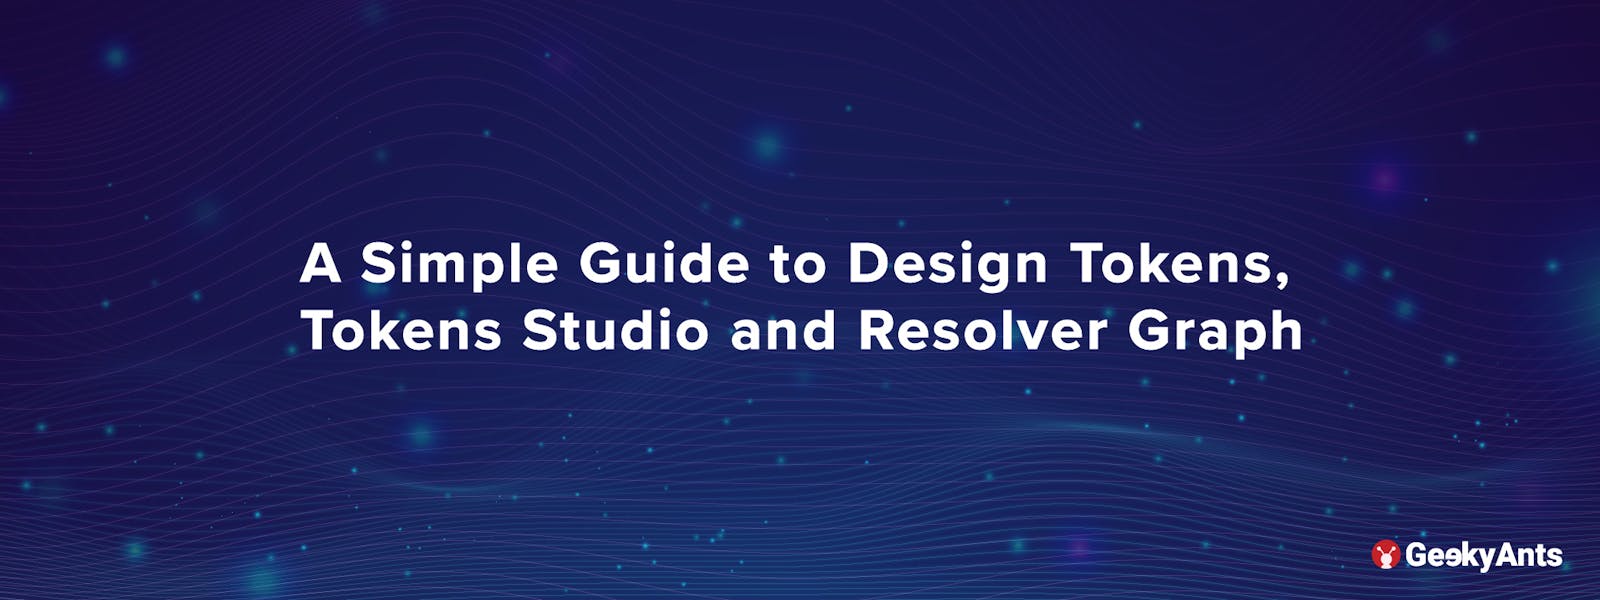 A Simple Guide to Design Tokens, Tokens Studio, and Resolver Graph